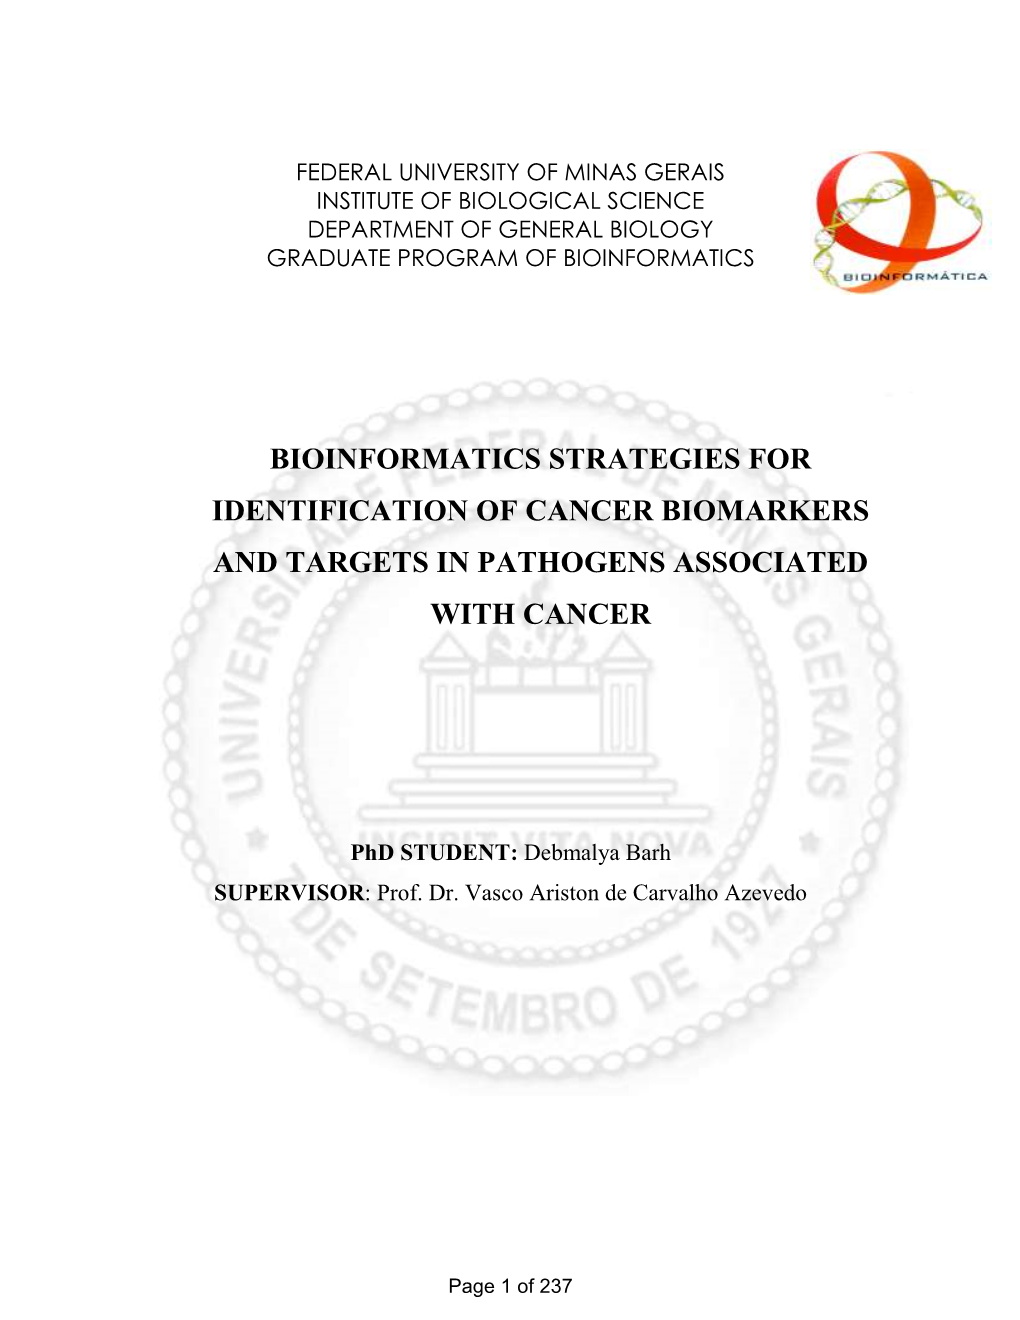 Bioinformatics Strategies for Identification of Cancer Biomarkers and Targets in Pathogens Associated with Cancer